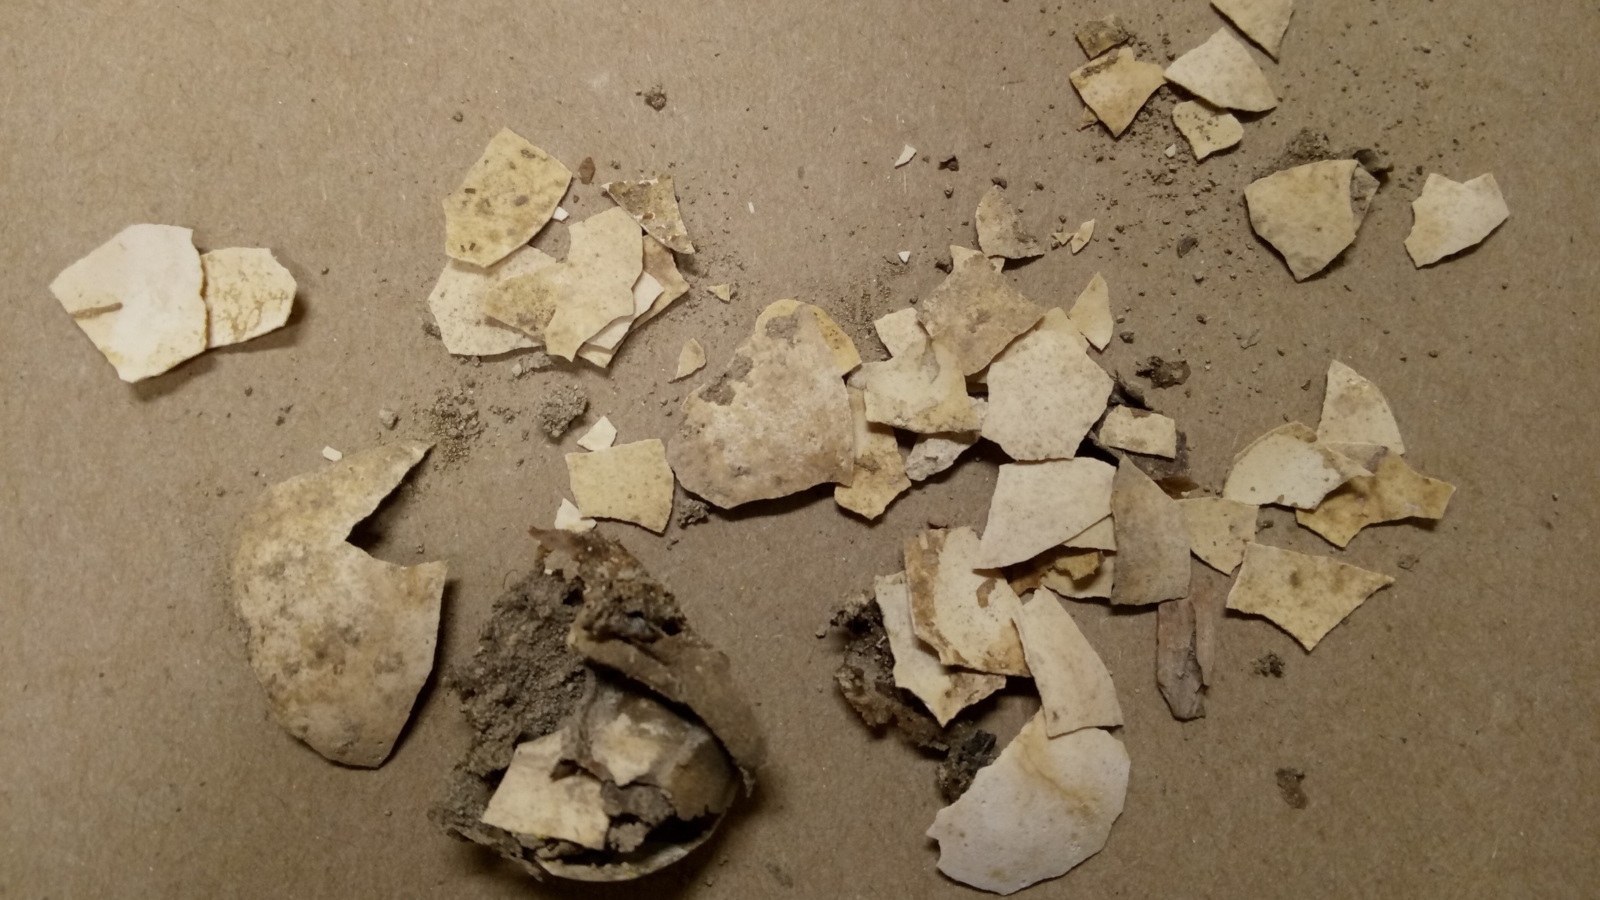 Chicken eggshell fragments unearthed in the City of David, Jerusalem, were reconstructed and analyzed. Photo courtesy of Bar-Ilan University